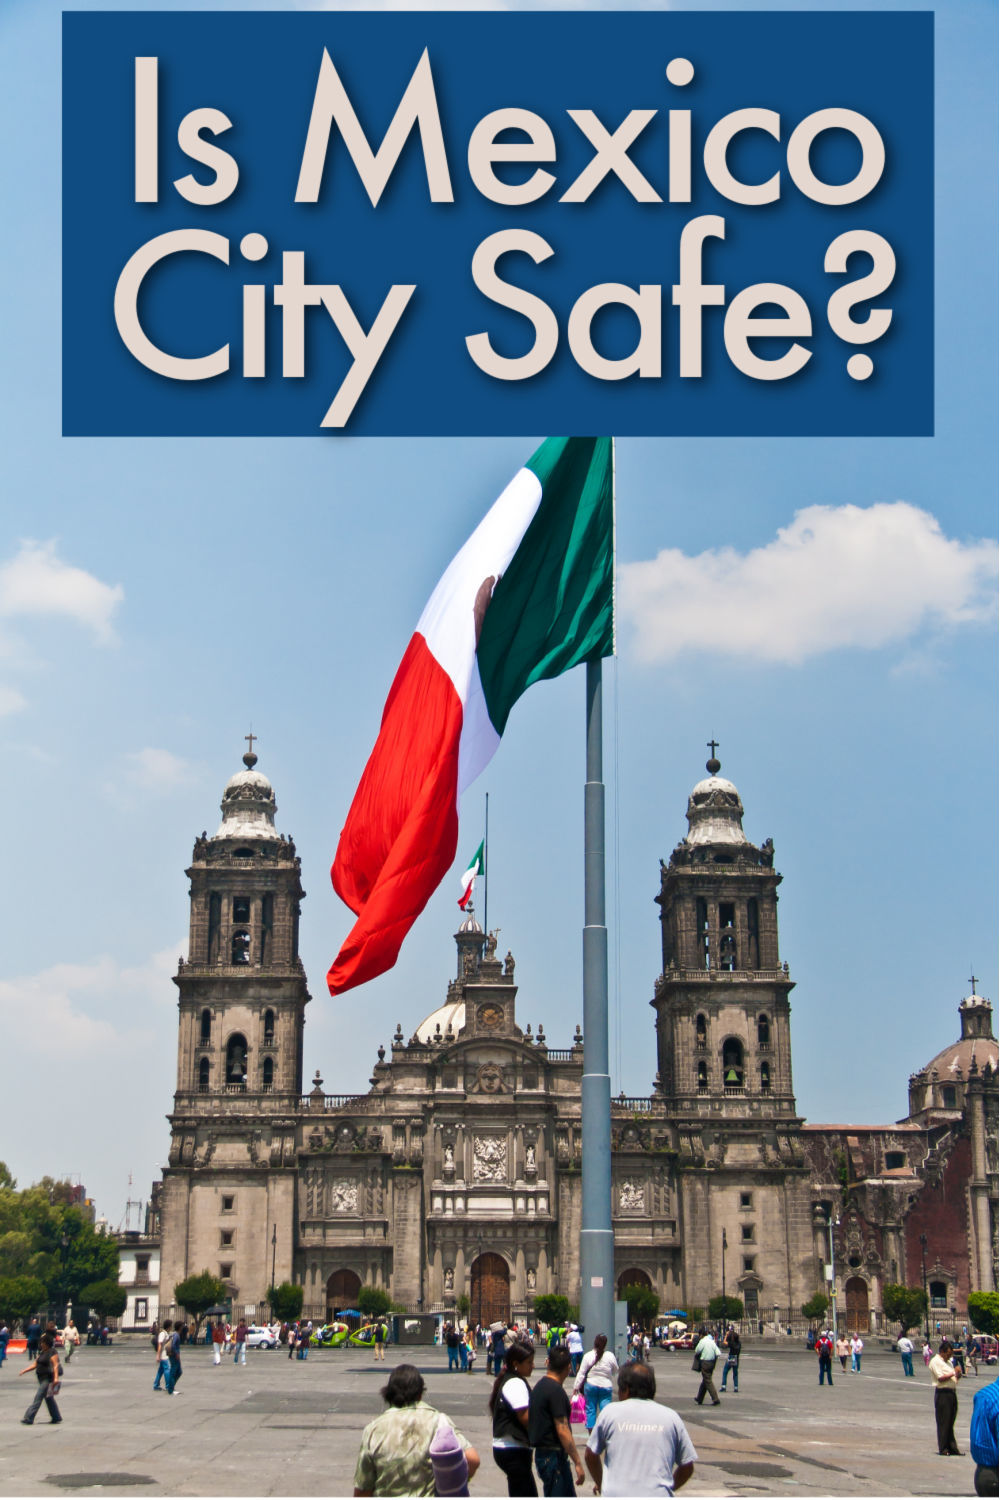 All you need to know about Mexico City Safety is here! We answer all the questions: - Is Mexico City safe for travelers? - What are the dangers in Mexico City?- Which are the safest neighborhoods in Mexico City?- Scams in Mexico City you need to be aware ofPlus, tips on where to stay, tours, and how to enjoy the incredible CDMX safely. 